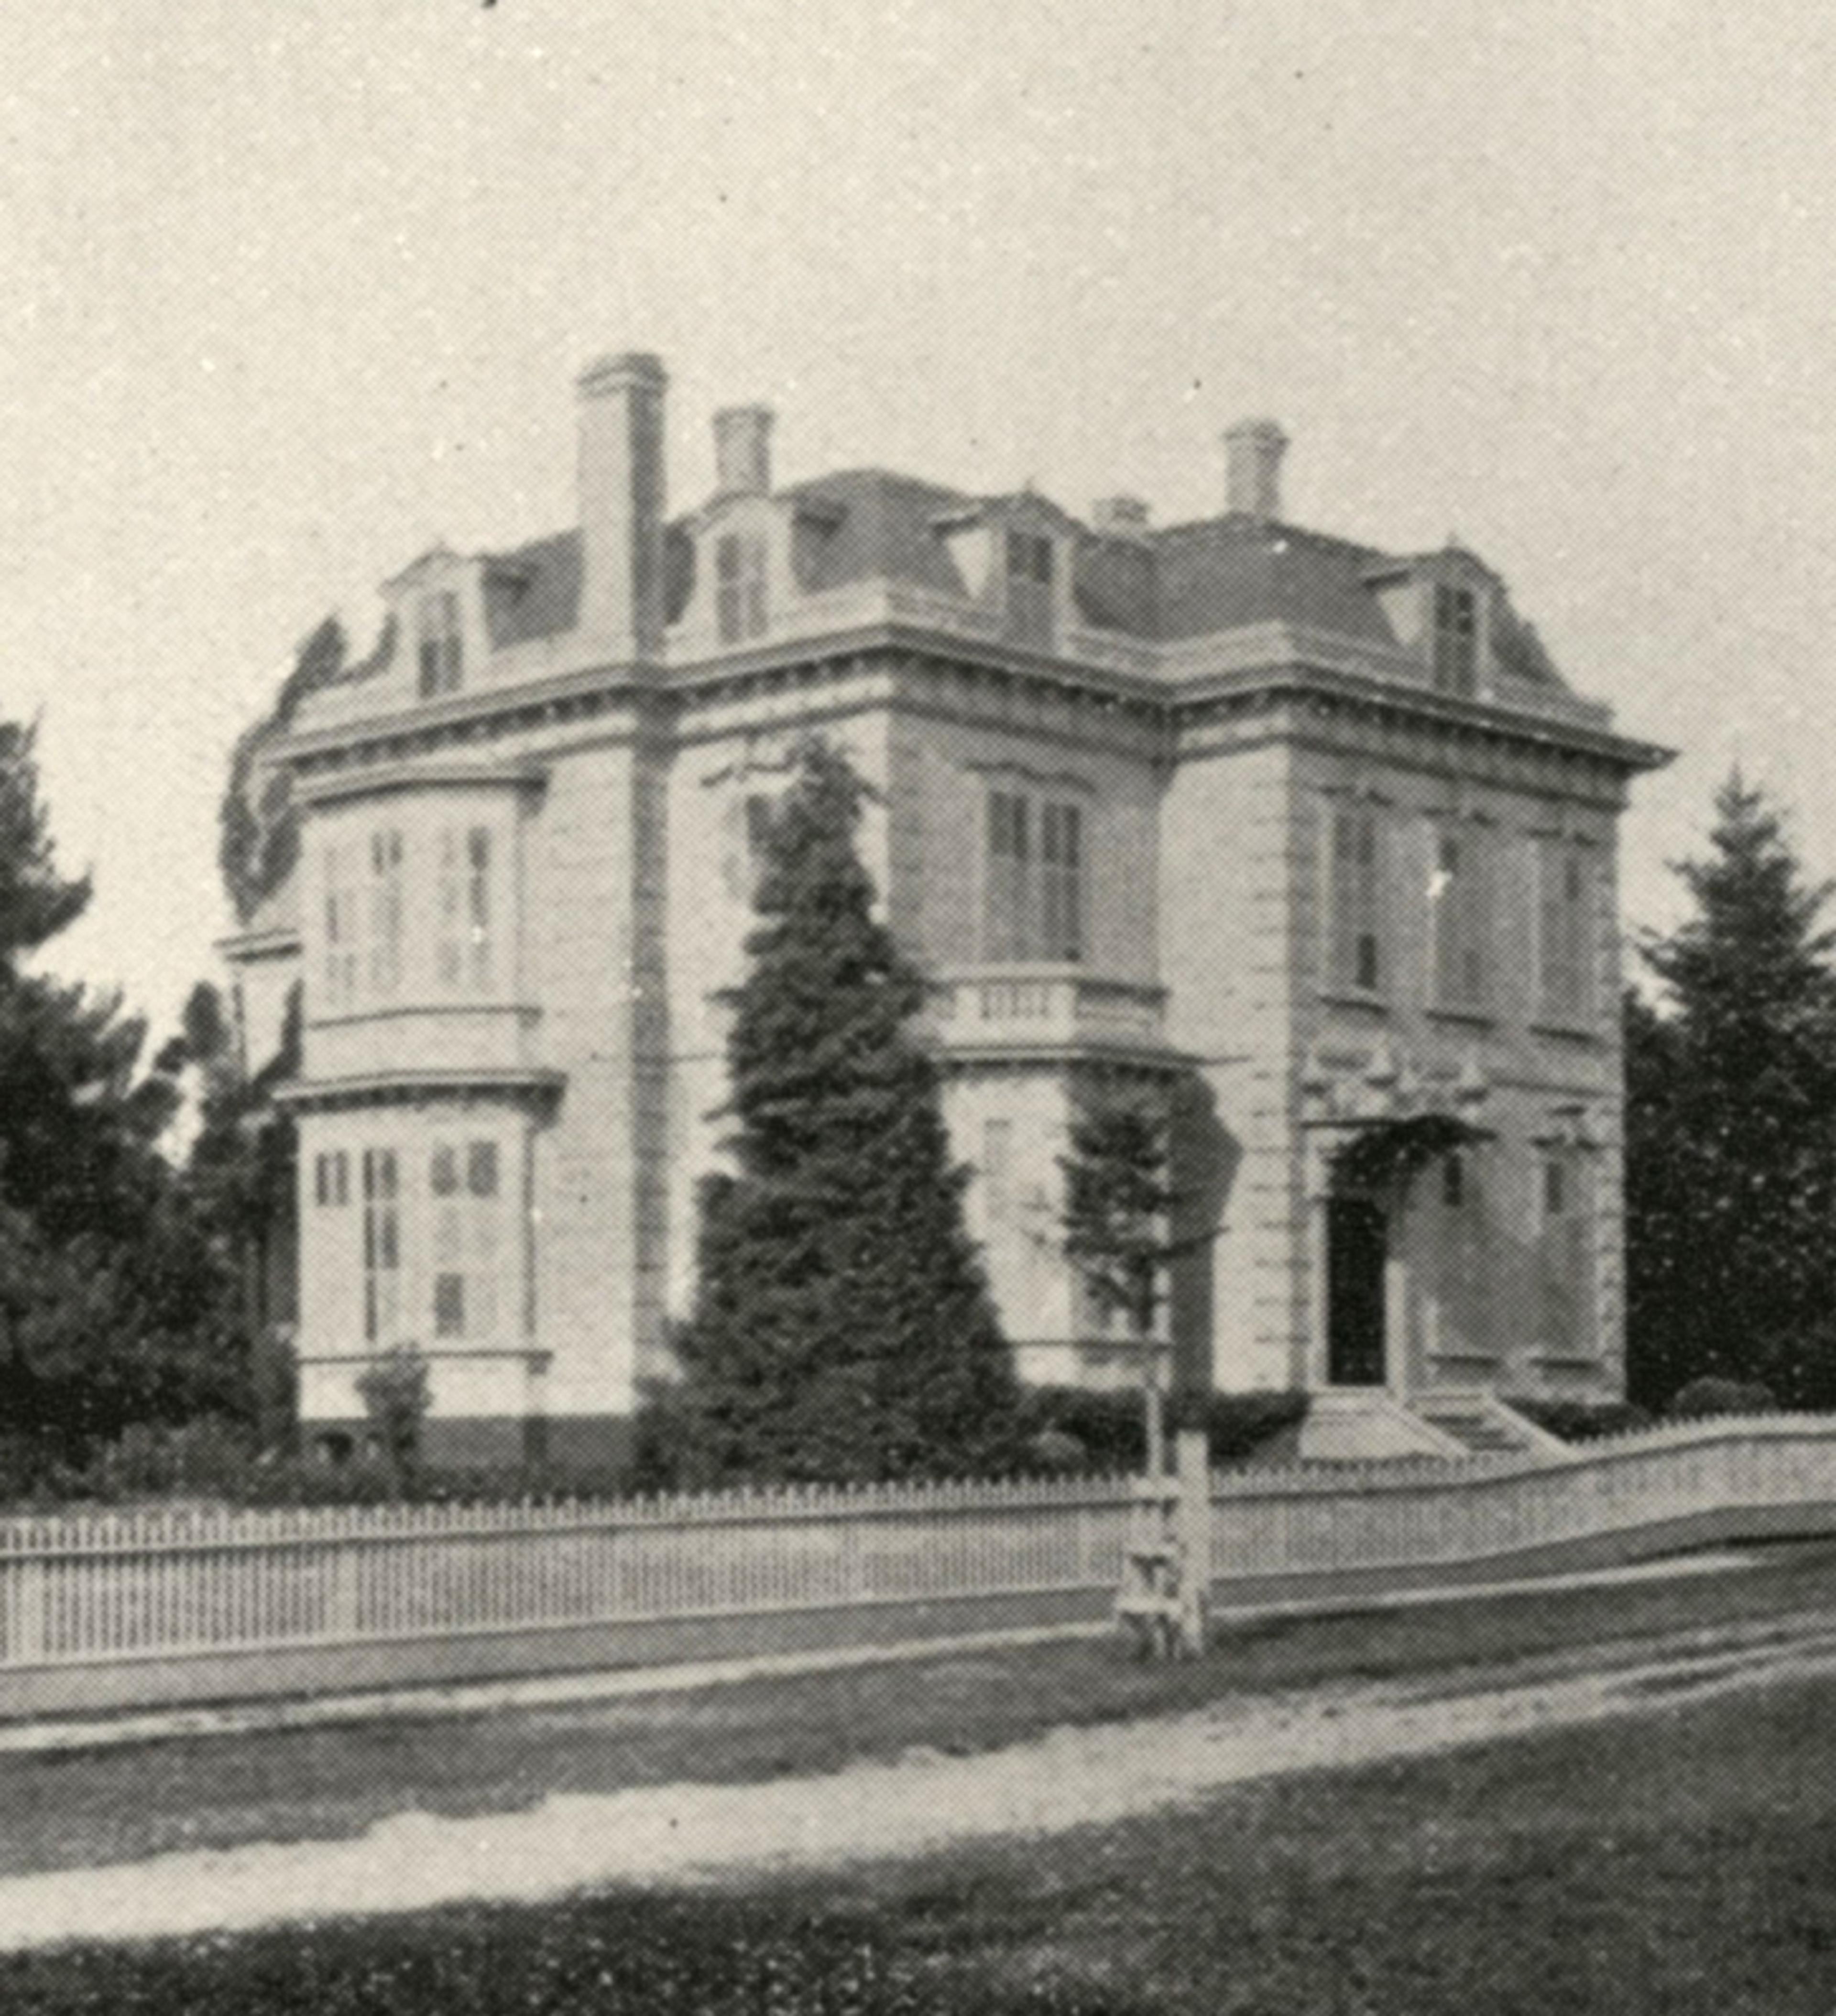 The Kamm House, Portland OR in 1892